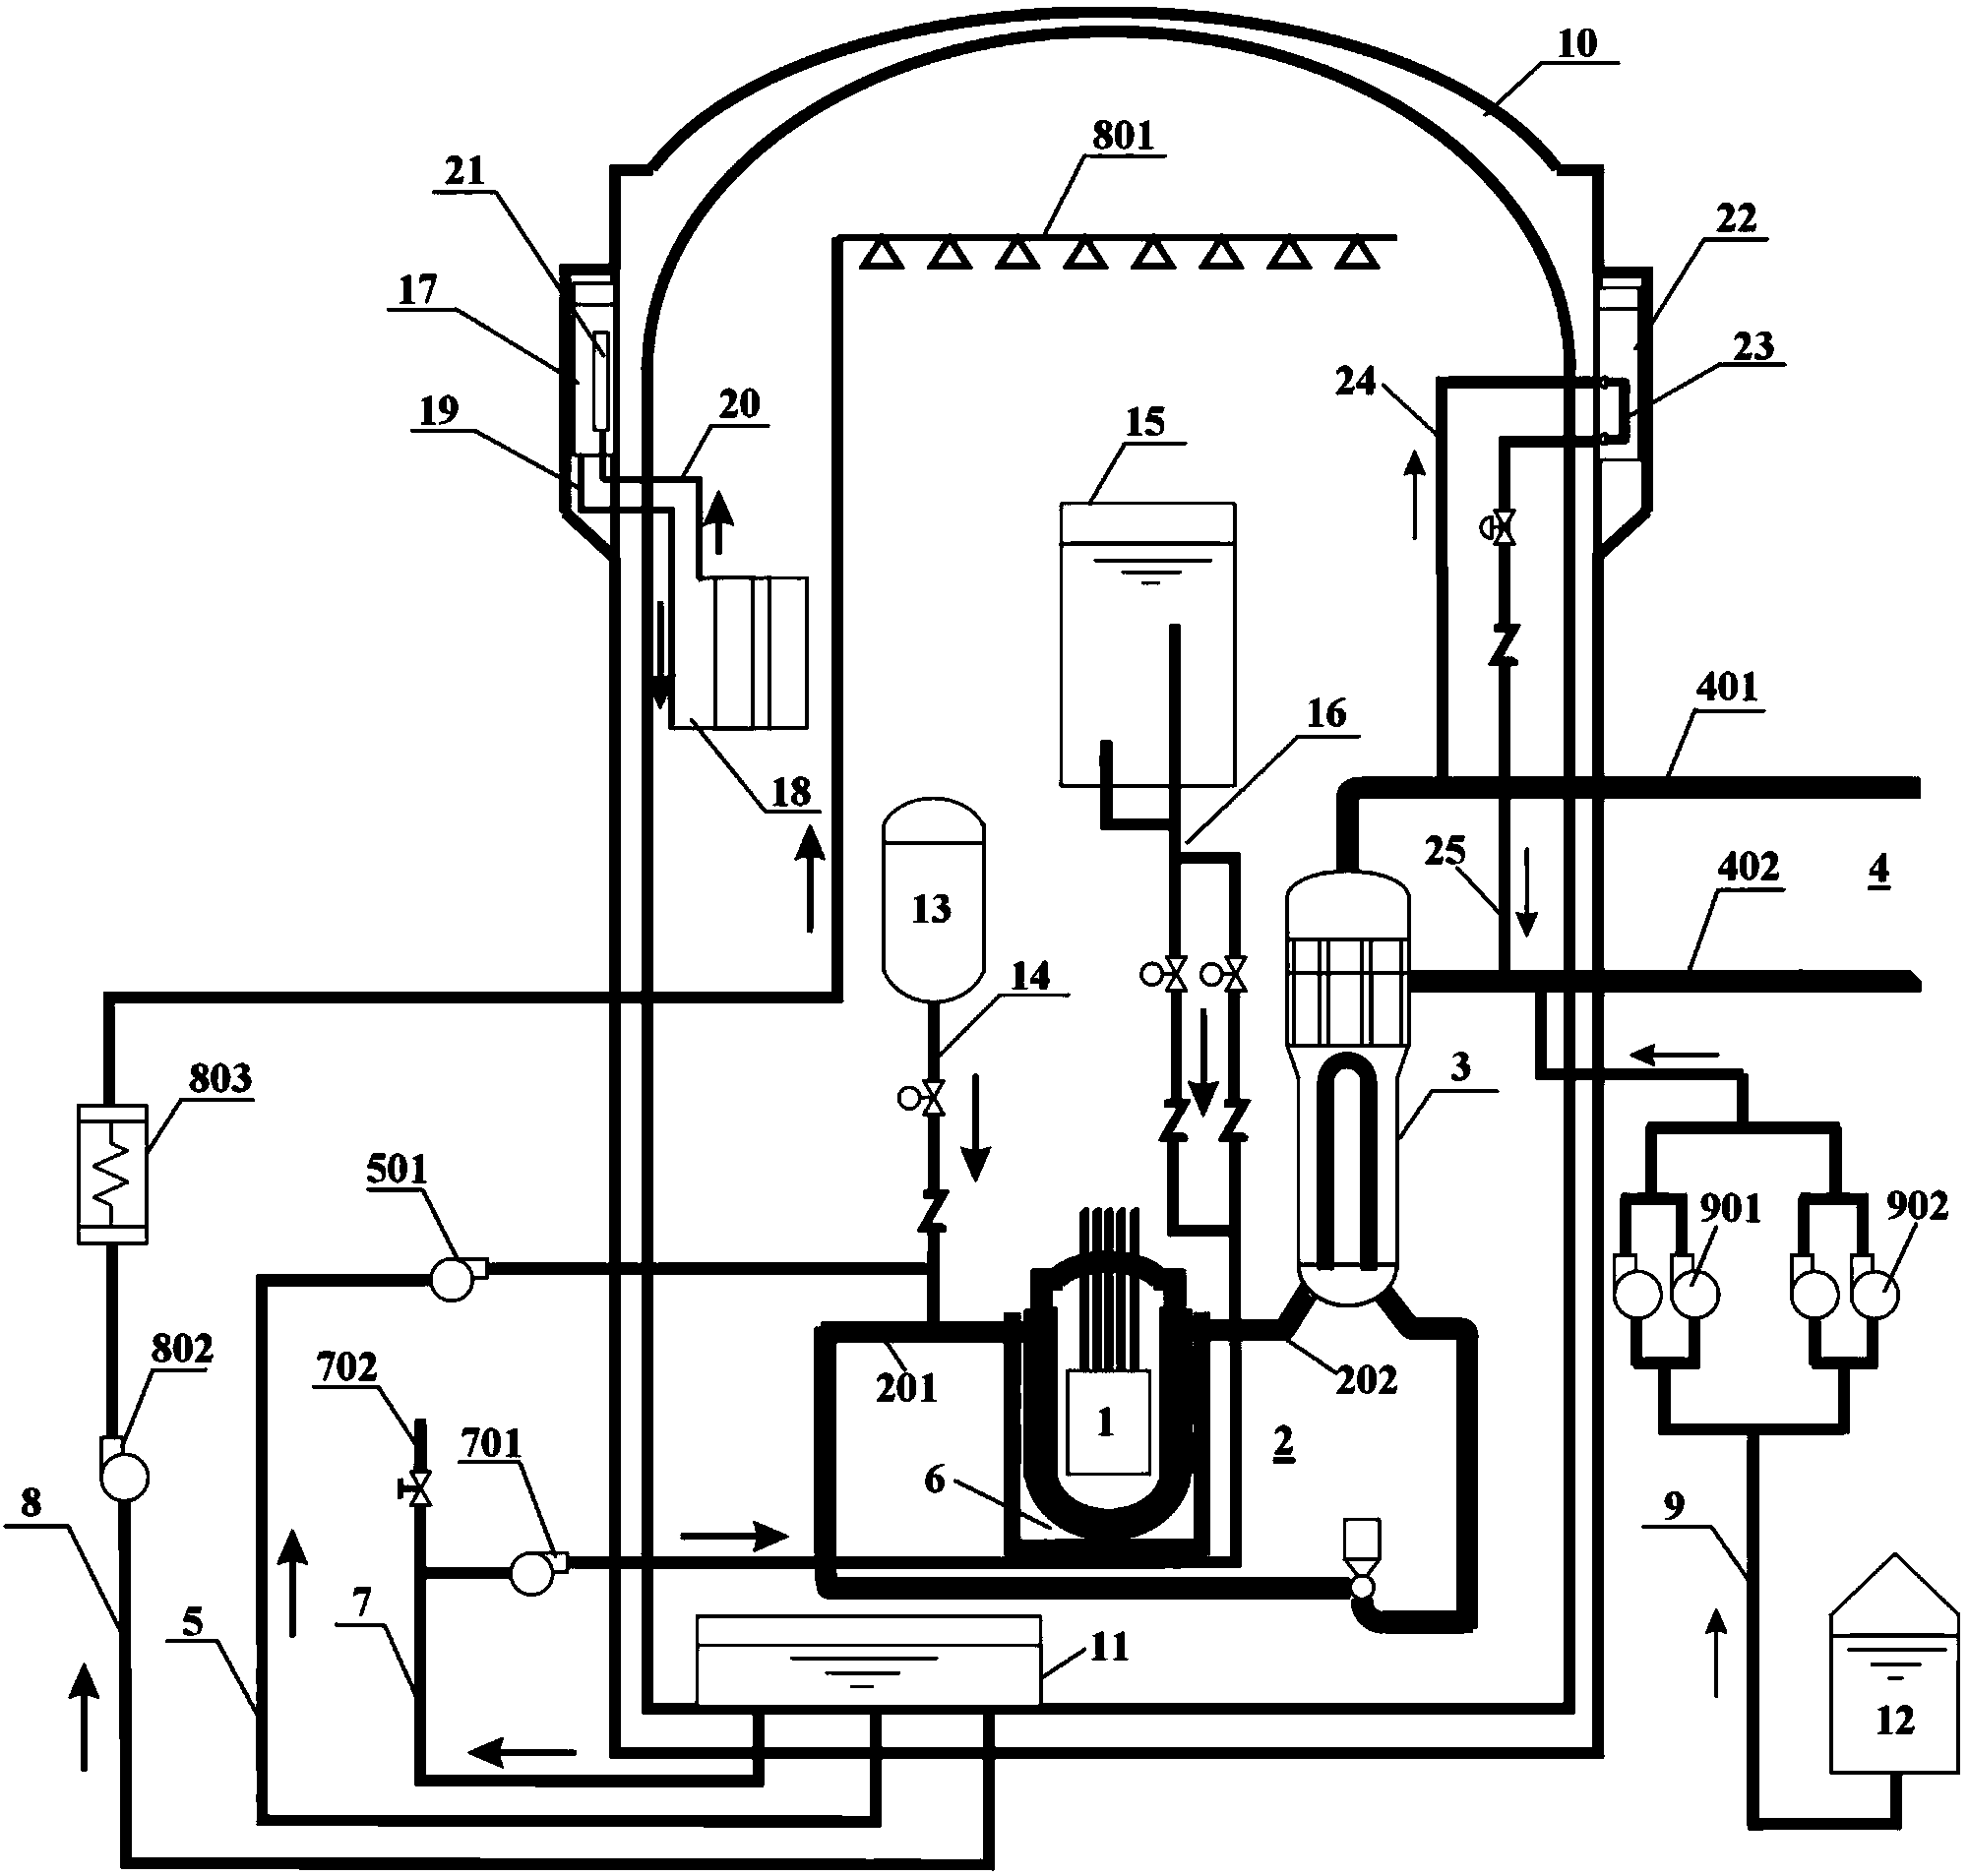 Active and passive nuclear steam supplying system based on 177 reactor core and nuclear power station thereof